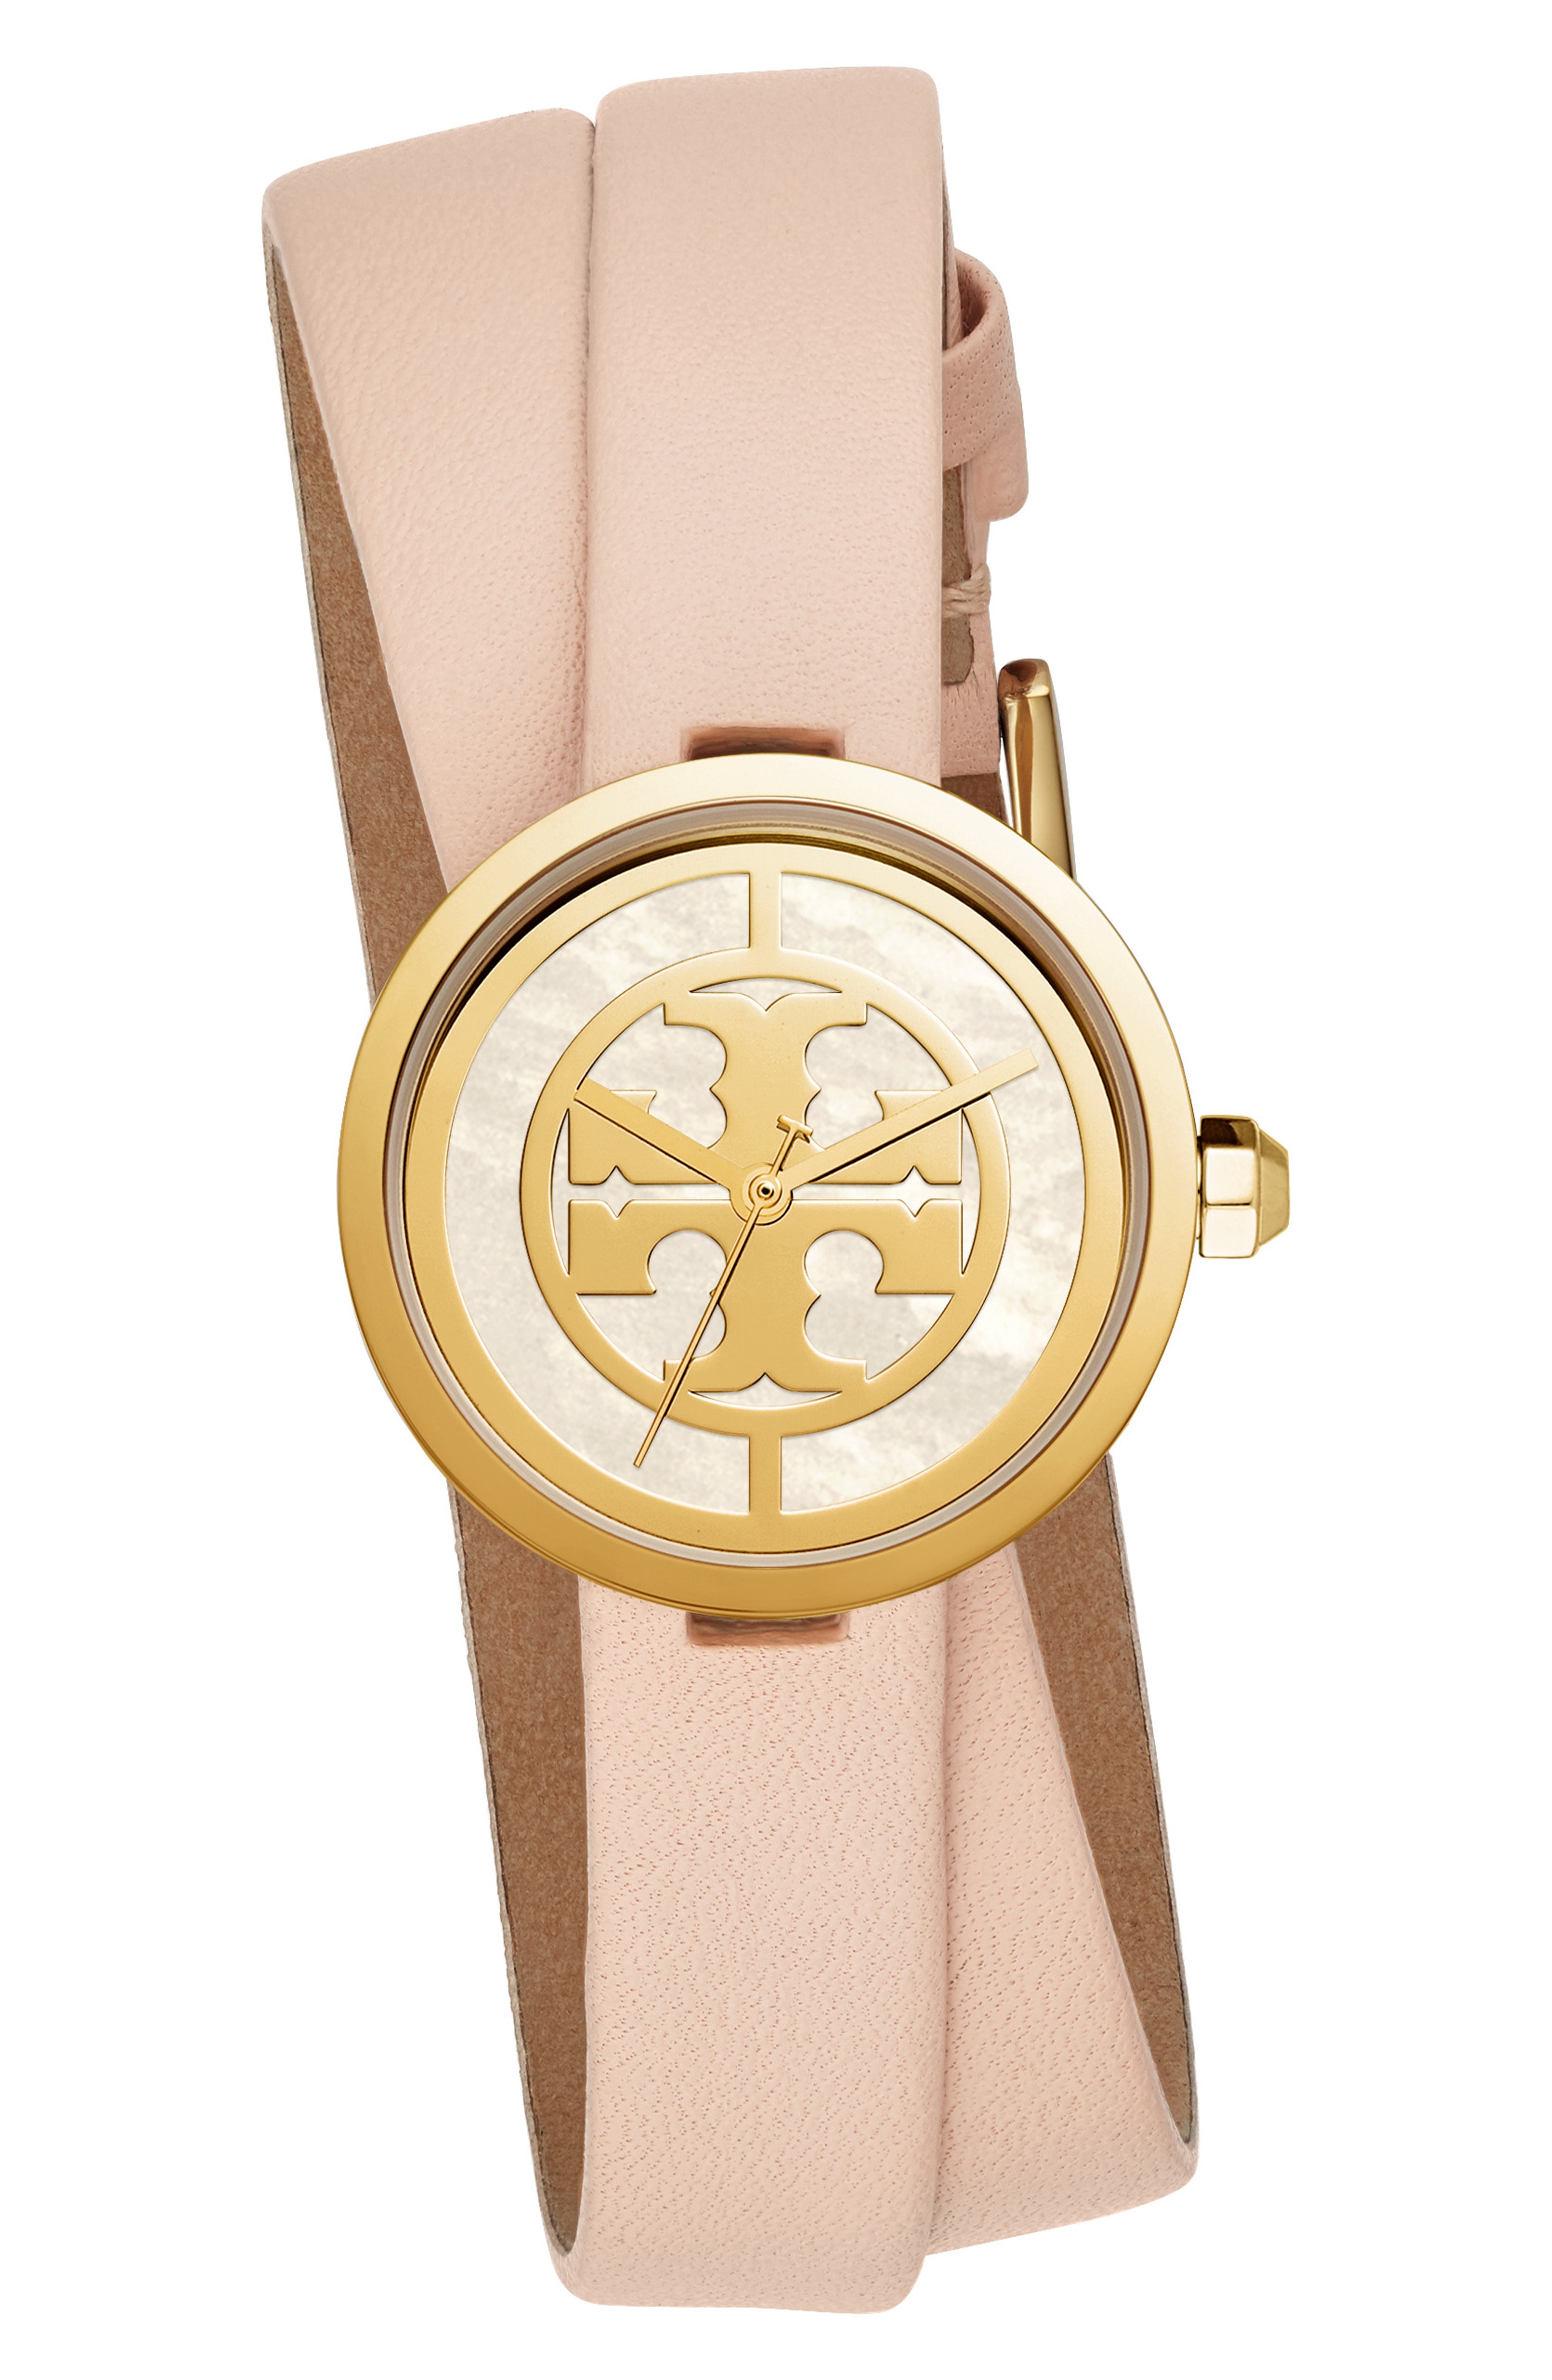 Tory Burch Reva Double Wrap Leather Strap Watch, 29mm